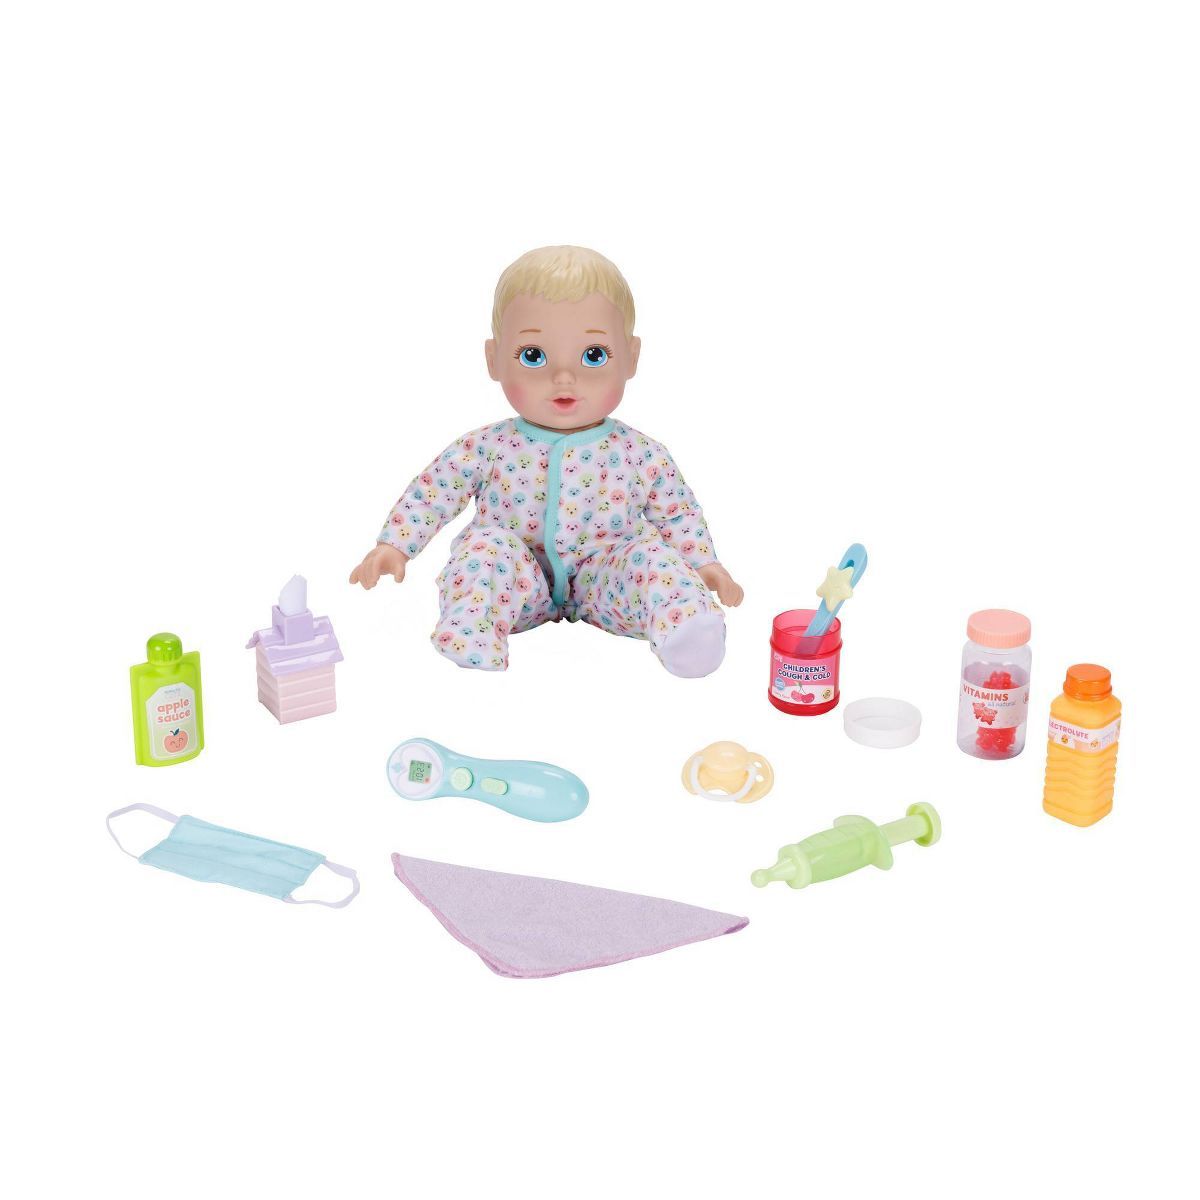 Perfectly Cute Get Better Baby Doll - Blonde Hair/Blue Eyes | Target